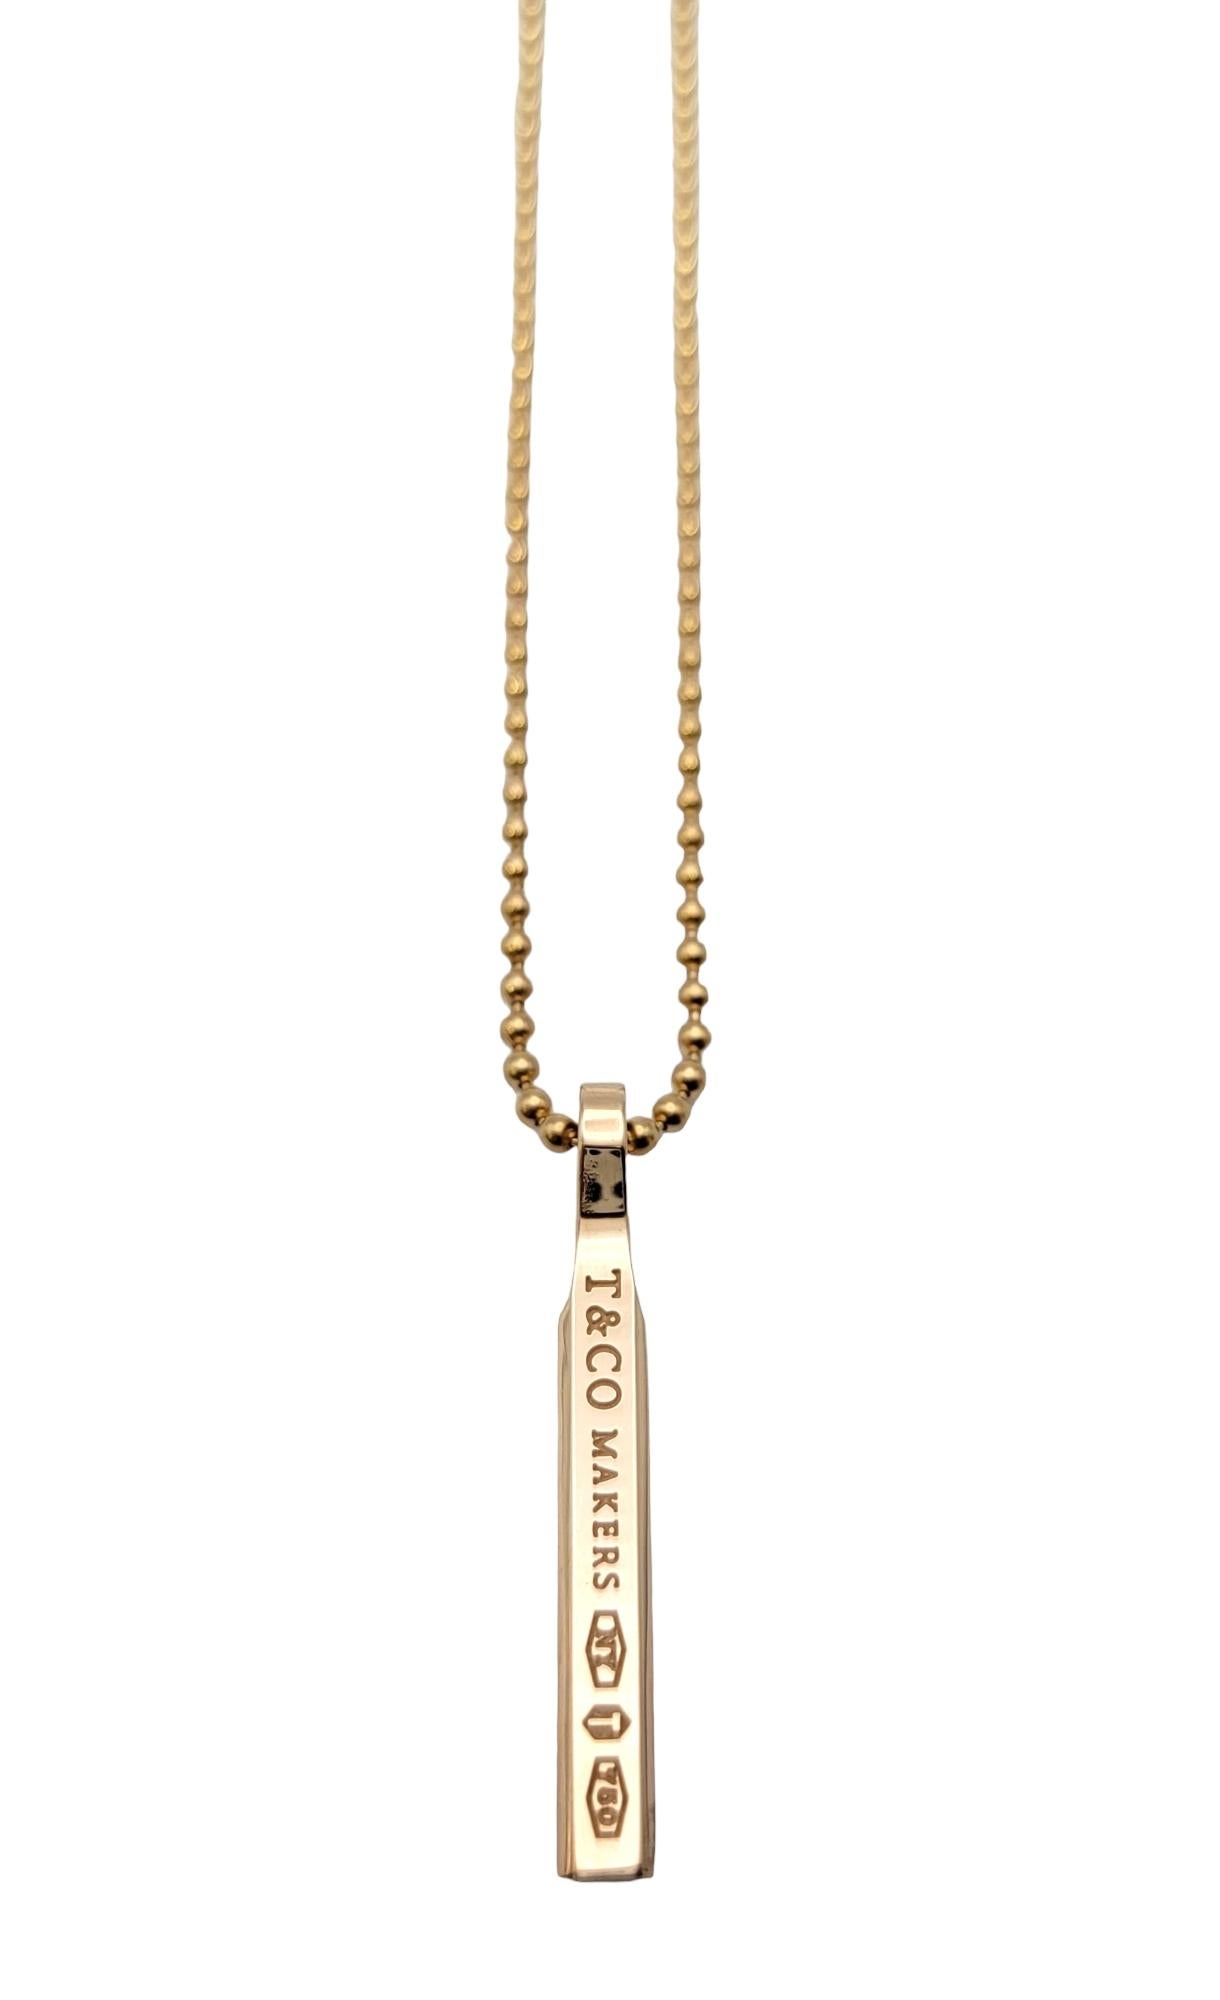 Chic bar necklace from Tiffany & Co. is stylish, modern and versatile. Founded in 1837 in New York City, Tiffany & Co. is one of the world's most storied luxury design houses recognized globally for its innovative jewelry design, extraordinary